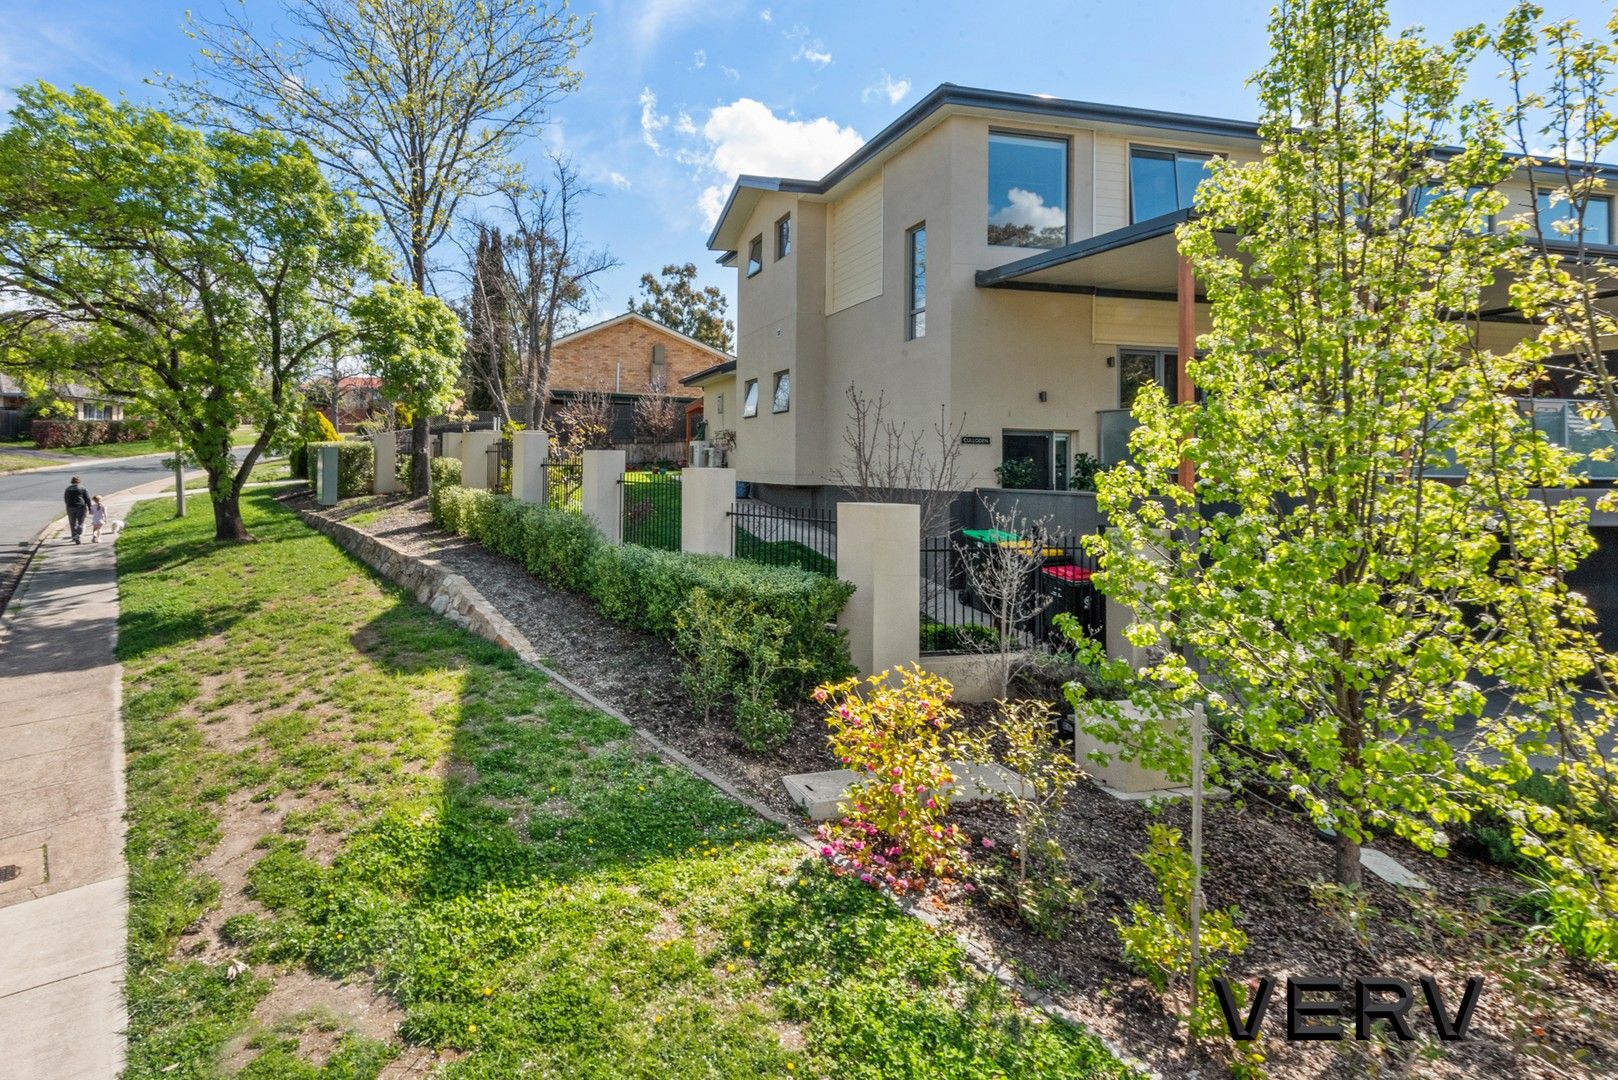 1/15 Charteris Crescent, Chifley ACT 2606, Image 0